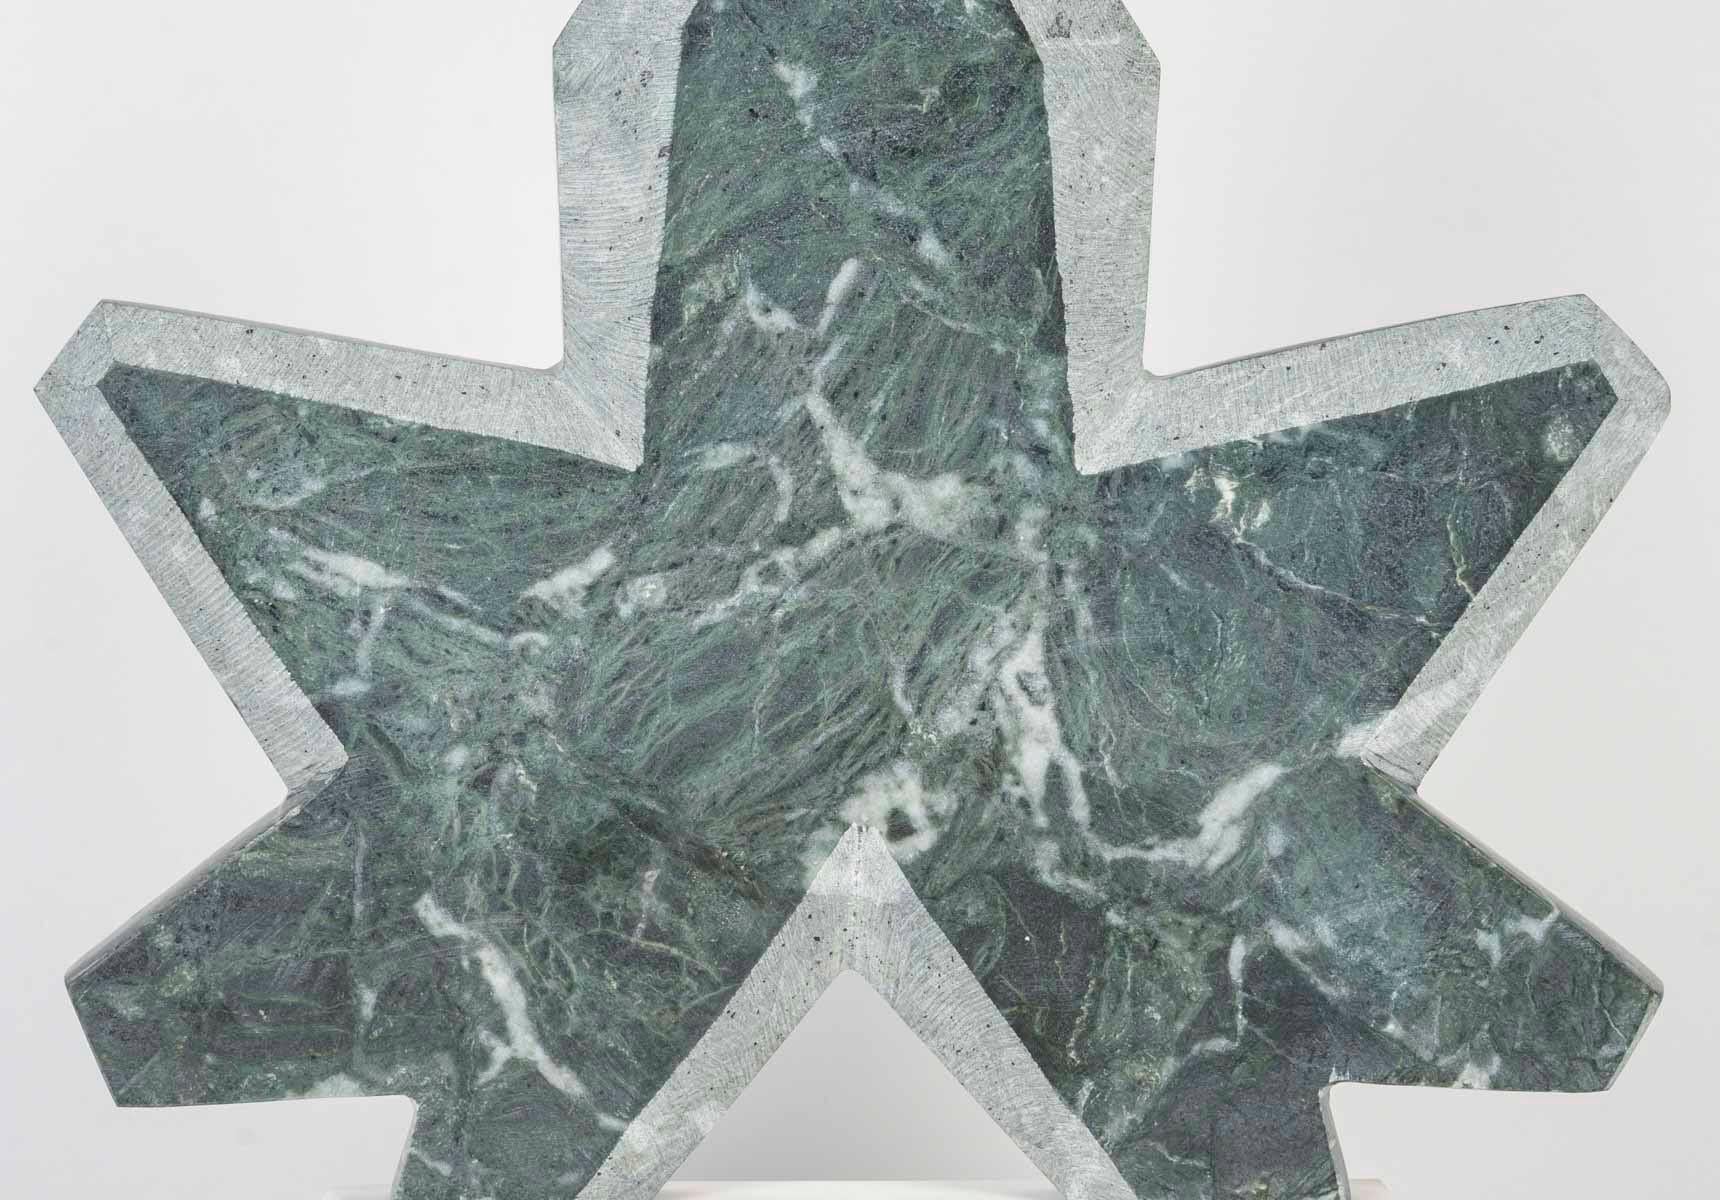 Sculpture by François Fernandez, known as SAVY, in light green marble, signed and dated 2001.

Sculpture in light green marble representing a leaf by the sculptor François Fernandez, known as SAVY, signed Savy and dated 2001.
H: 38cm , W: 33,5cm, D: